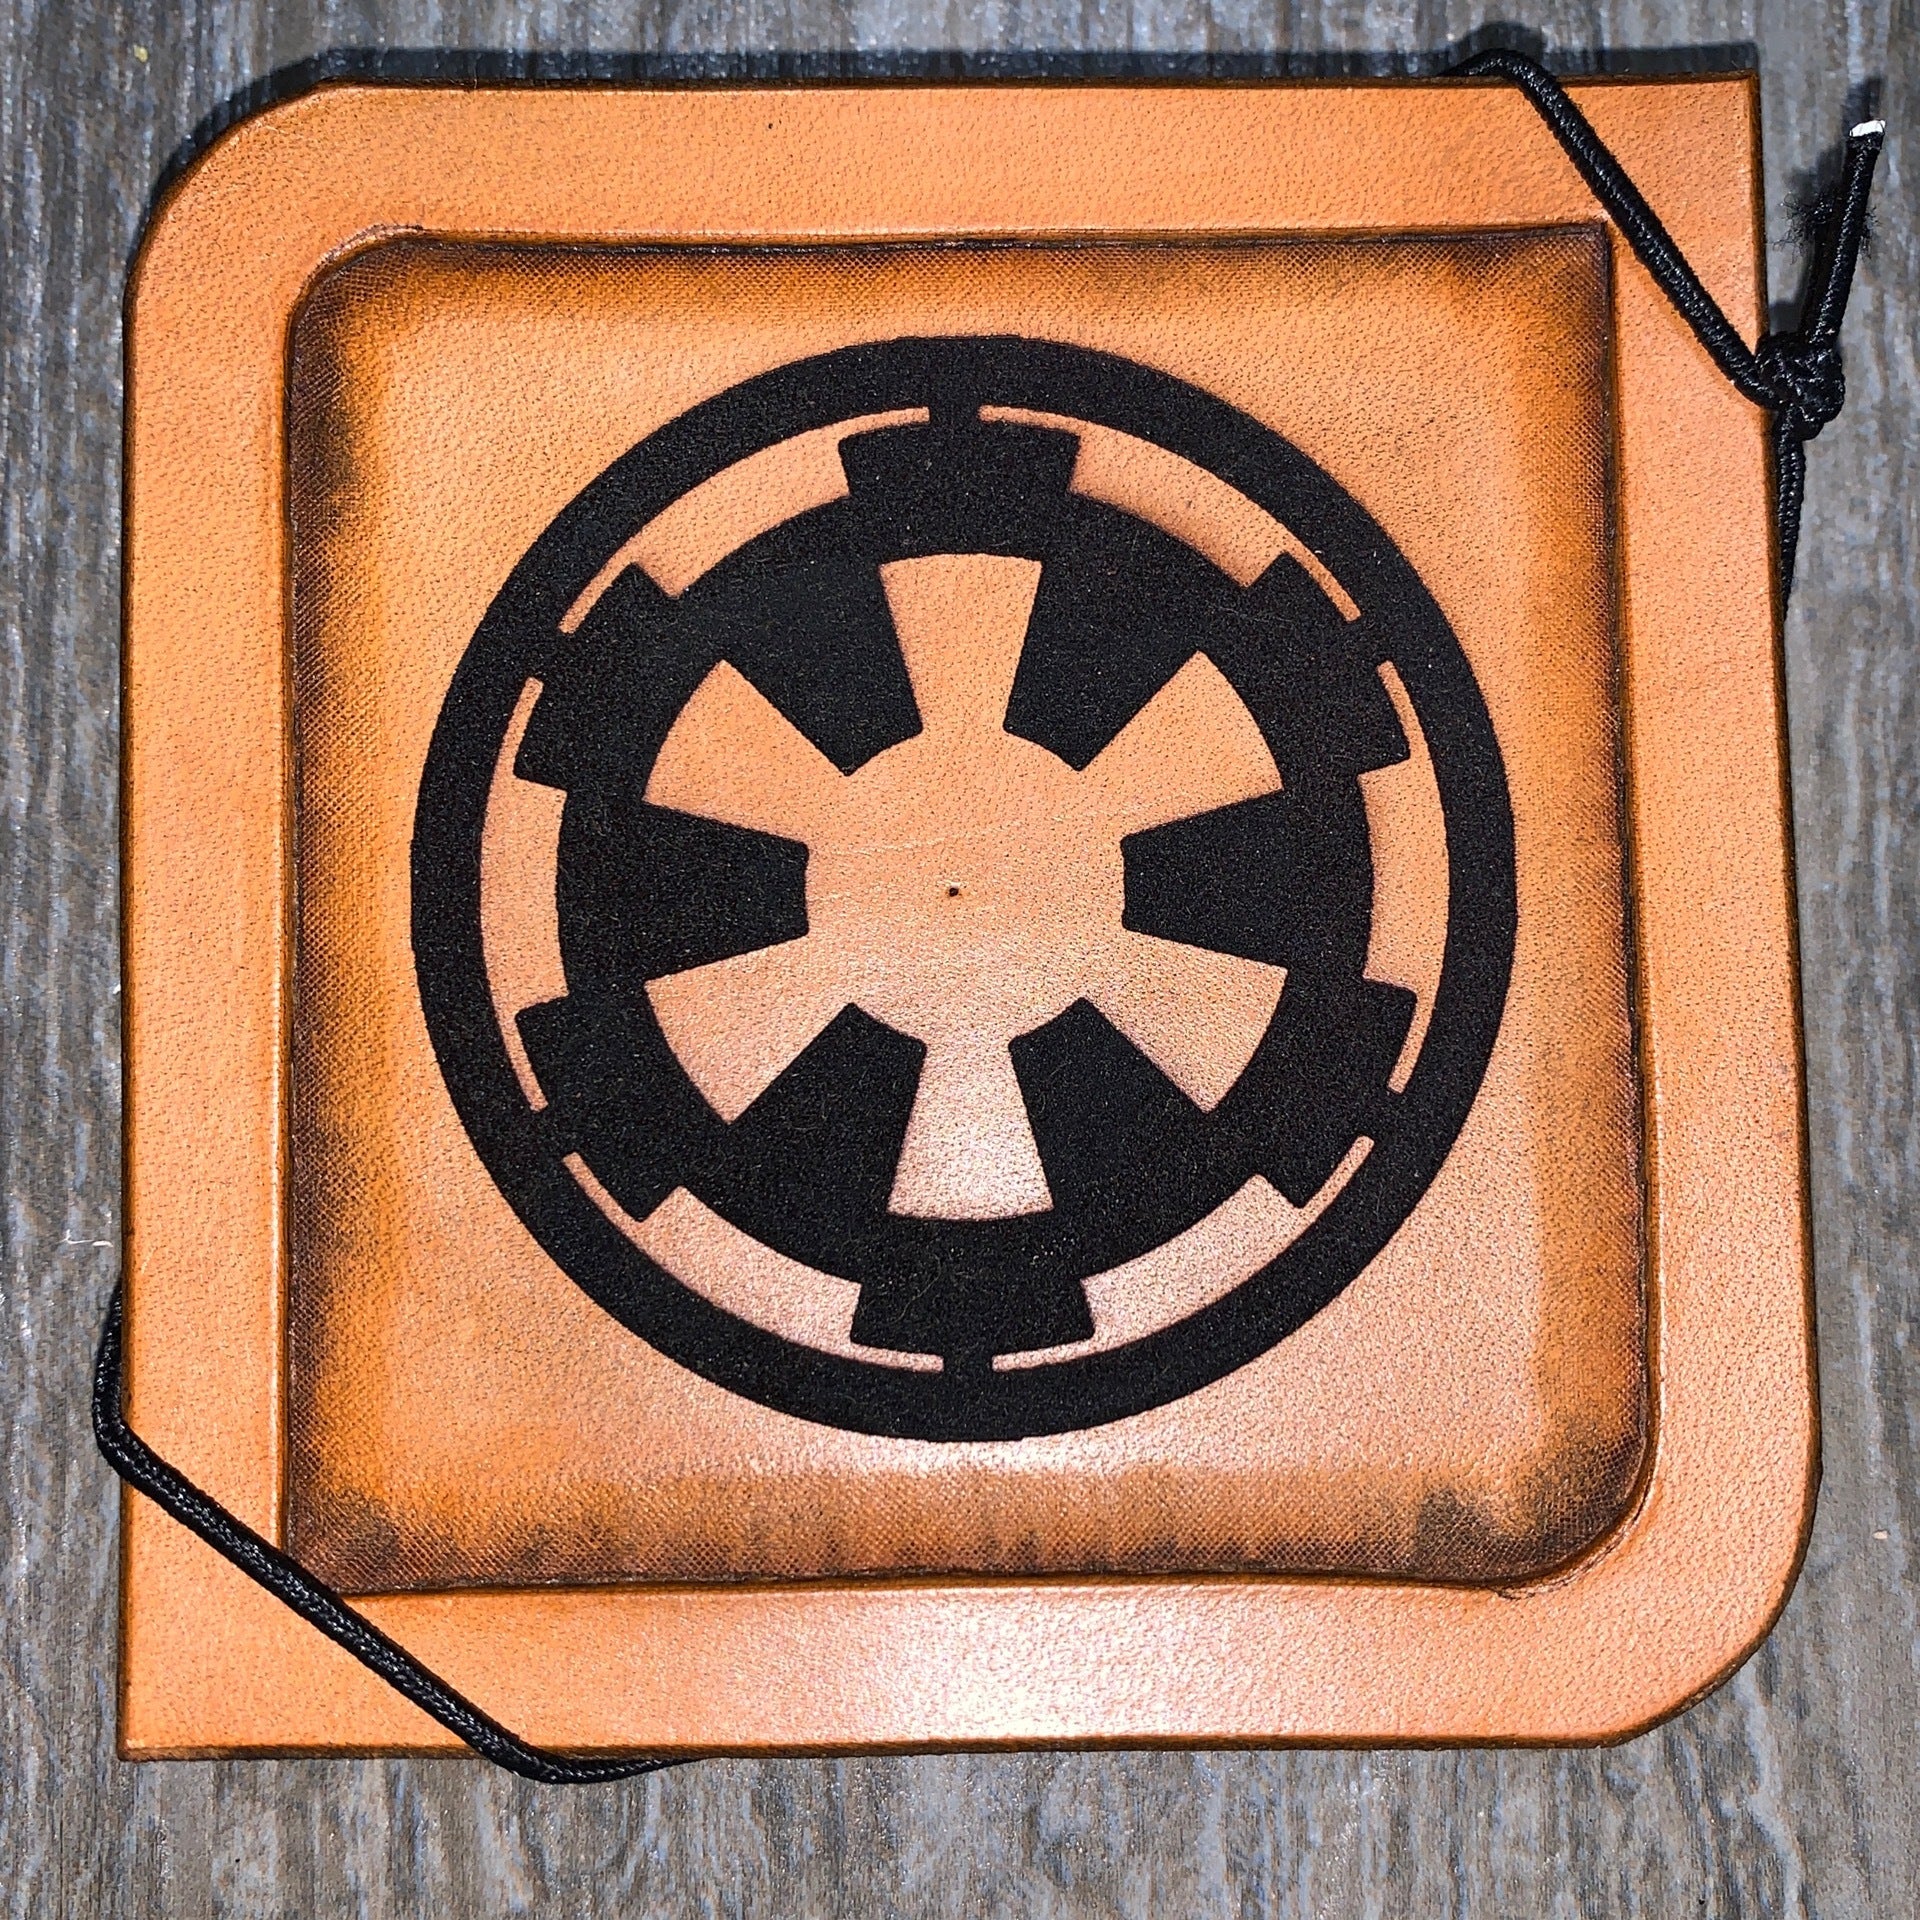 DE - Star Wars engraved leather coasters  Brassroots Leather - Custom  Steampunk Inspired Leatherware and More